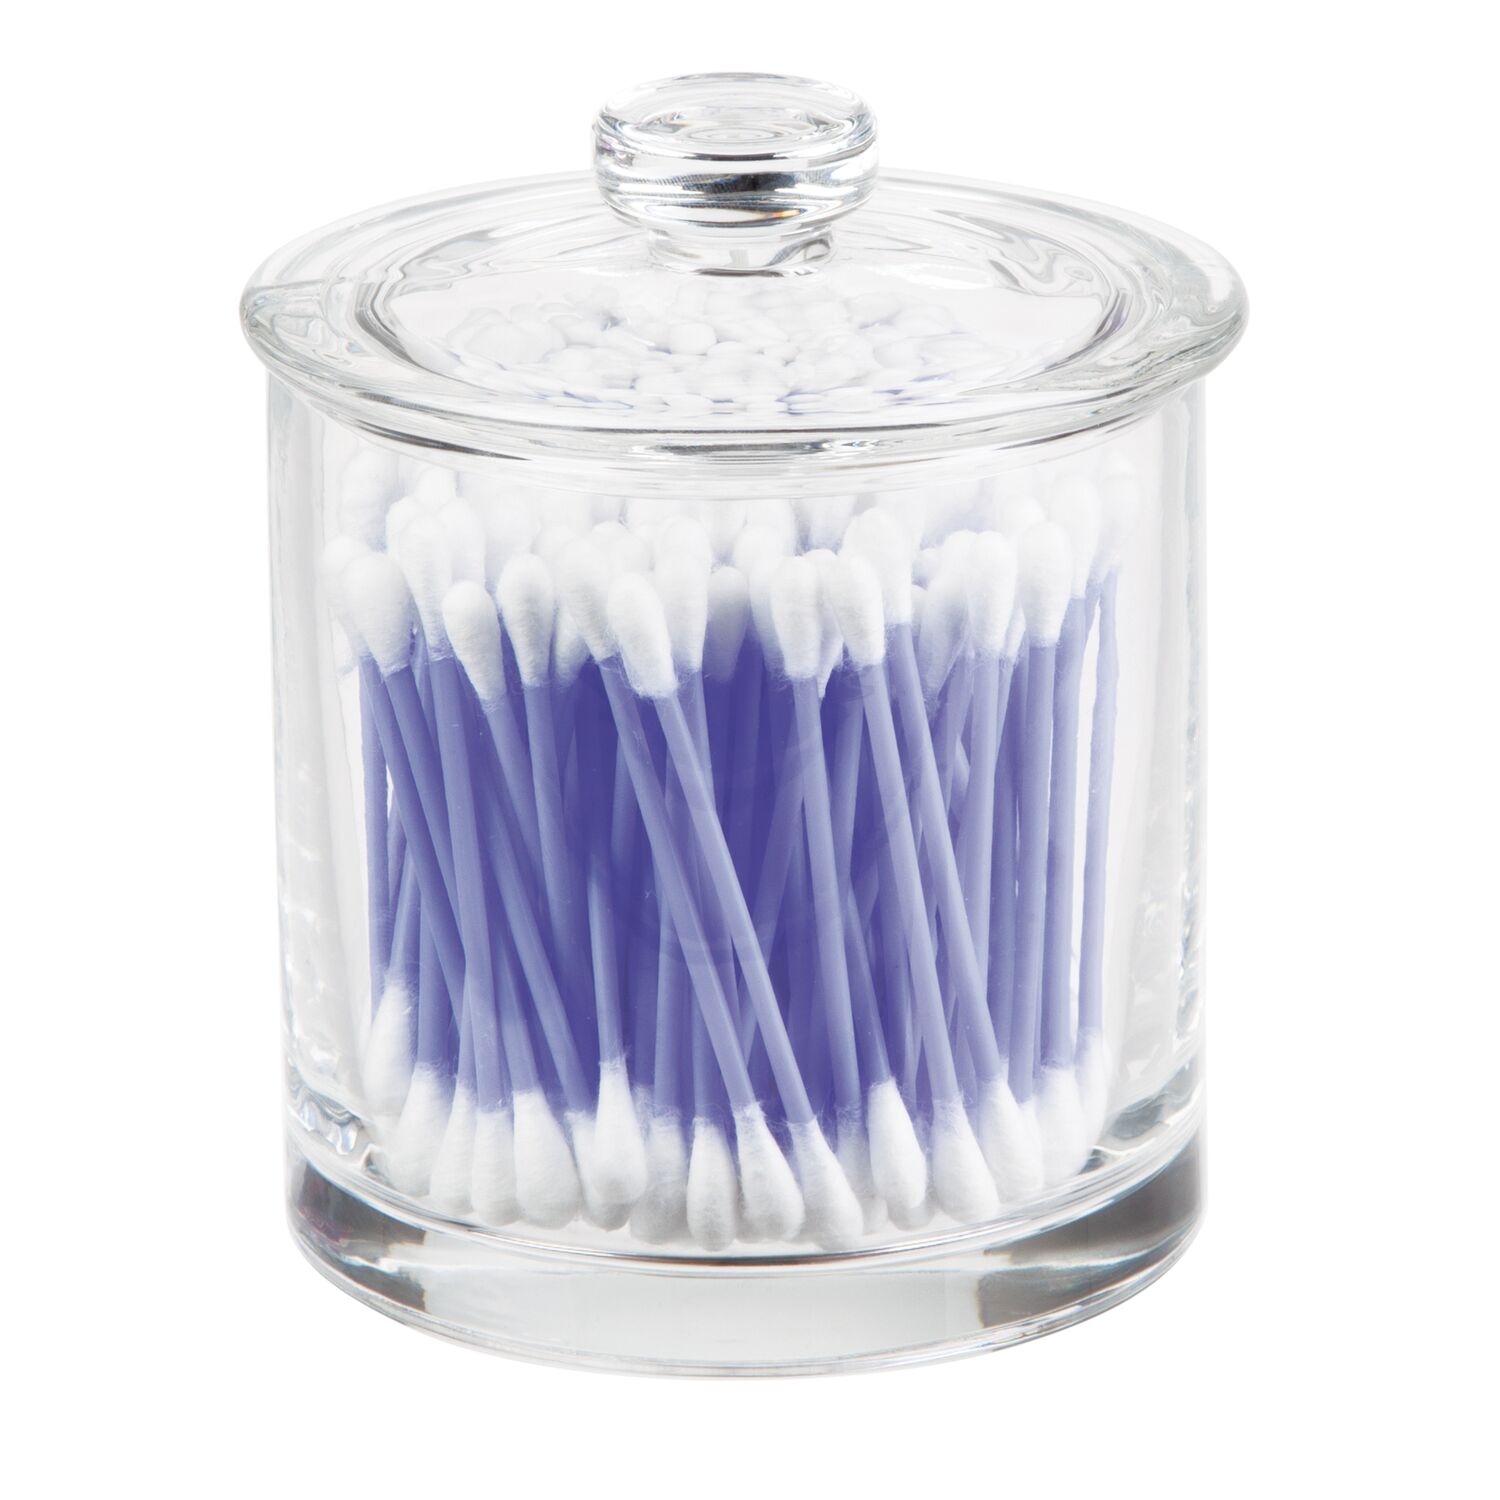 Better Homes & Gardens Small Glass Apothecary Vanity Jar, Clear - image 1 of 6